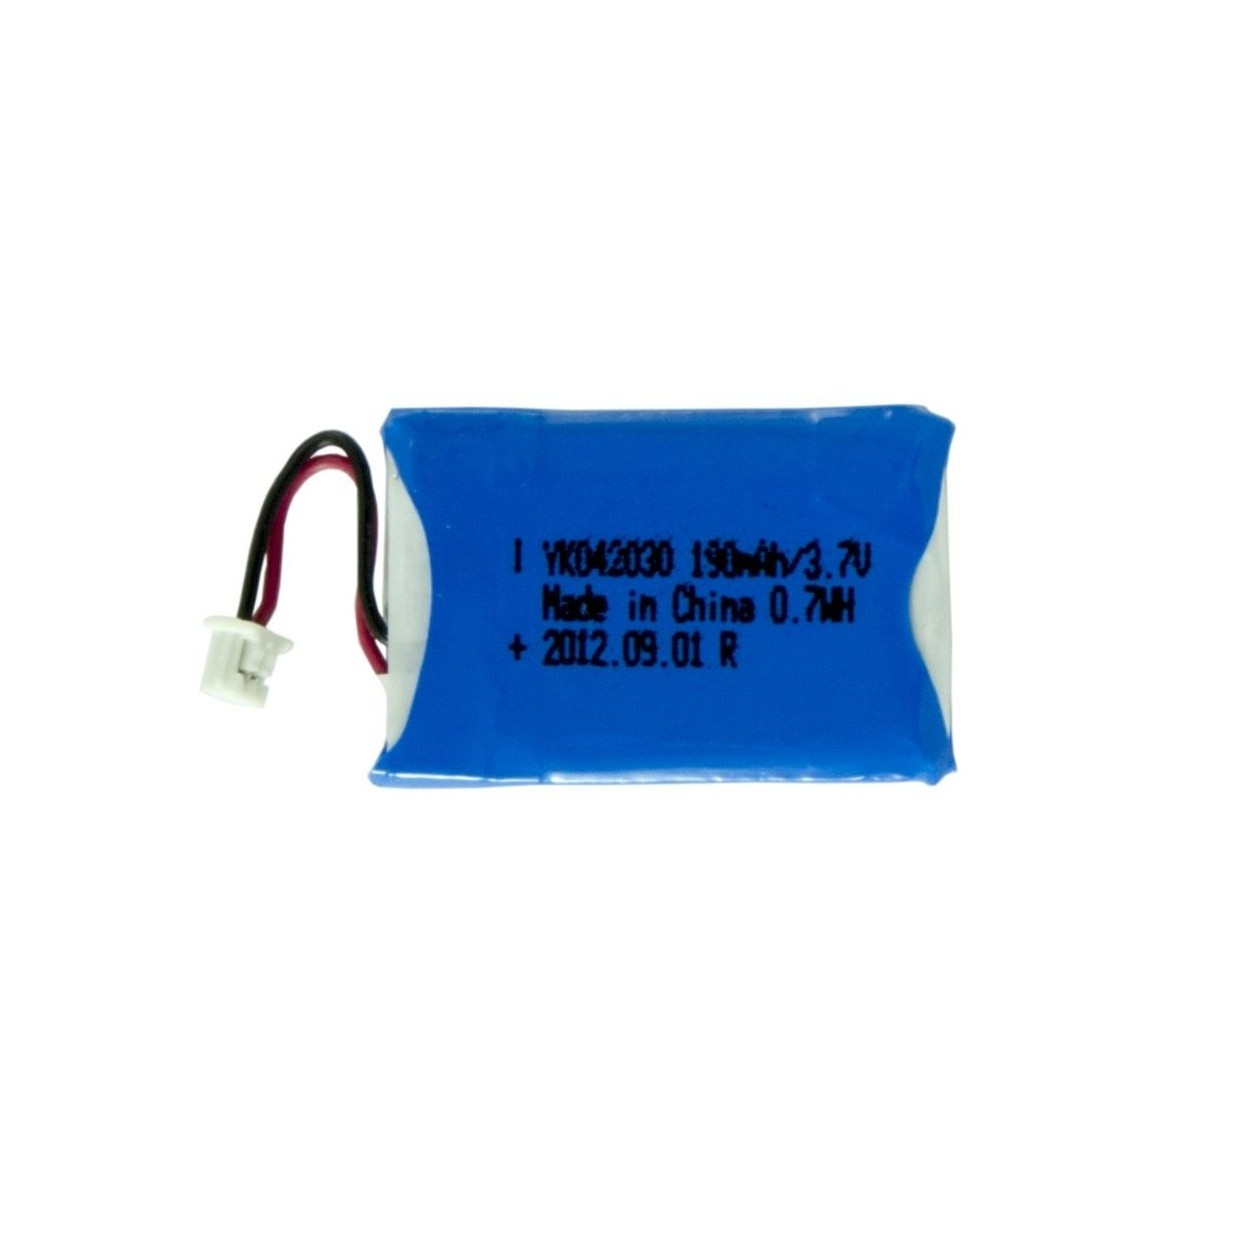 674500 KOAMTAC 200MAH REPLACEMENT BATTERY FOR KDC 20/80/100/200 SCANNERS. KOAMTAC RECOMMENDS RE